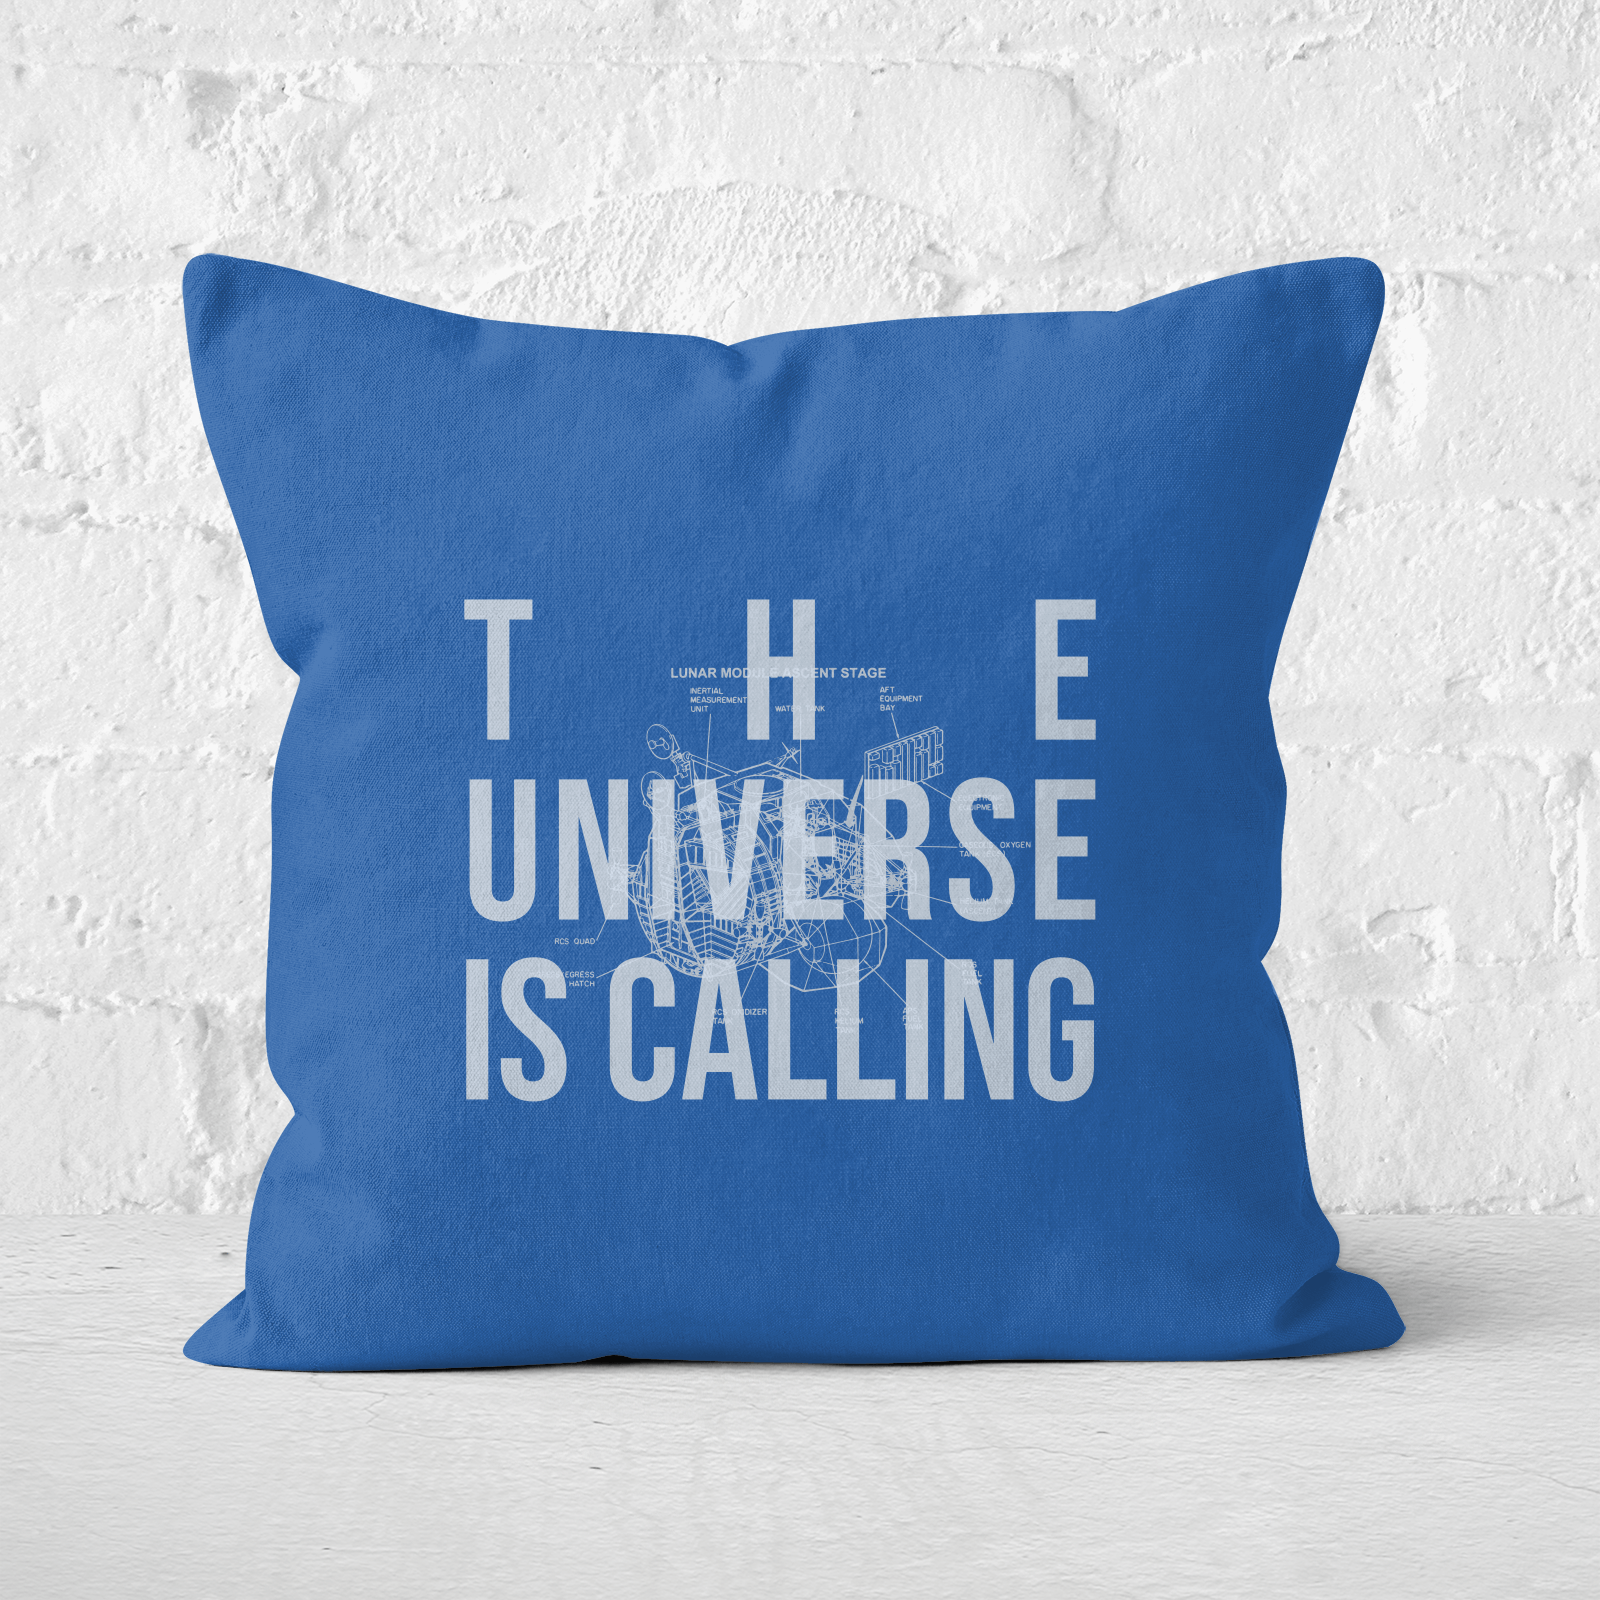 The Universe Is Calling Schematic Square Cushion - 60x60cm - Soft Touch